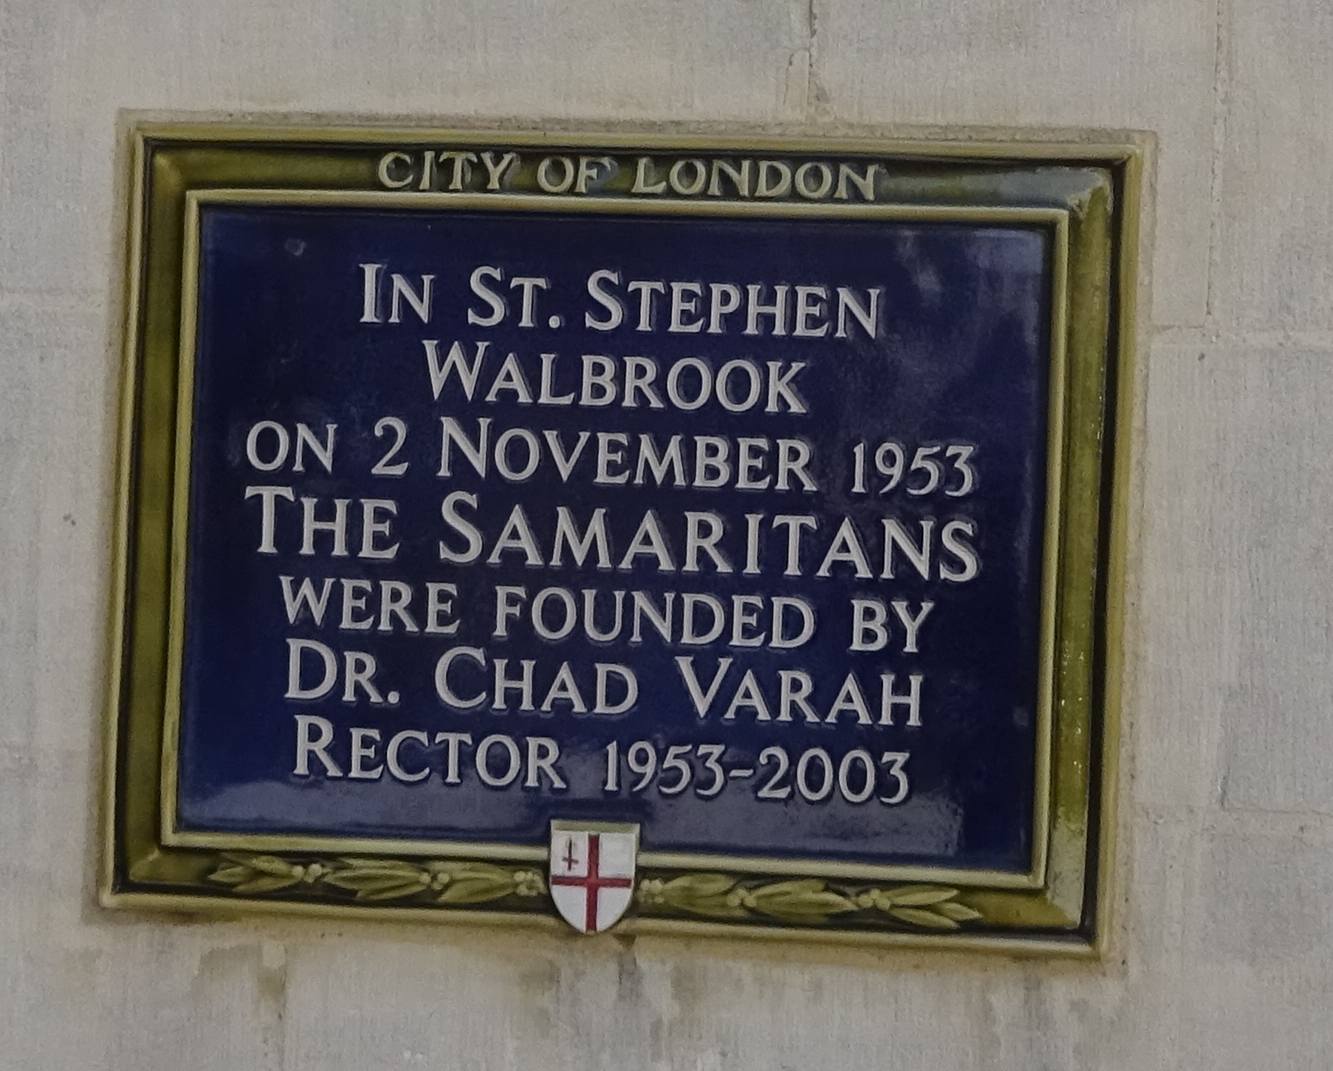 St Stephen Walbrook, blue plaque commemorating the start of the Samaritans in November 1953 by Dr Chad Varah Rector 1953-2003.